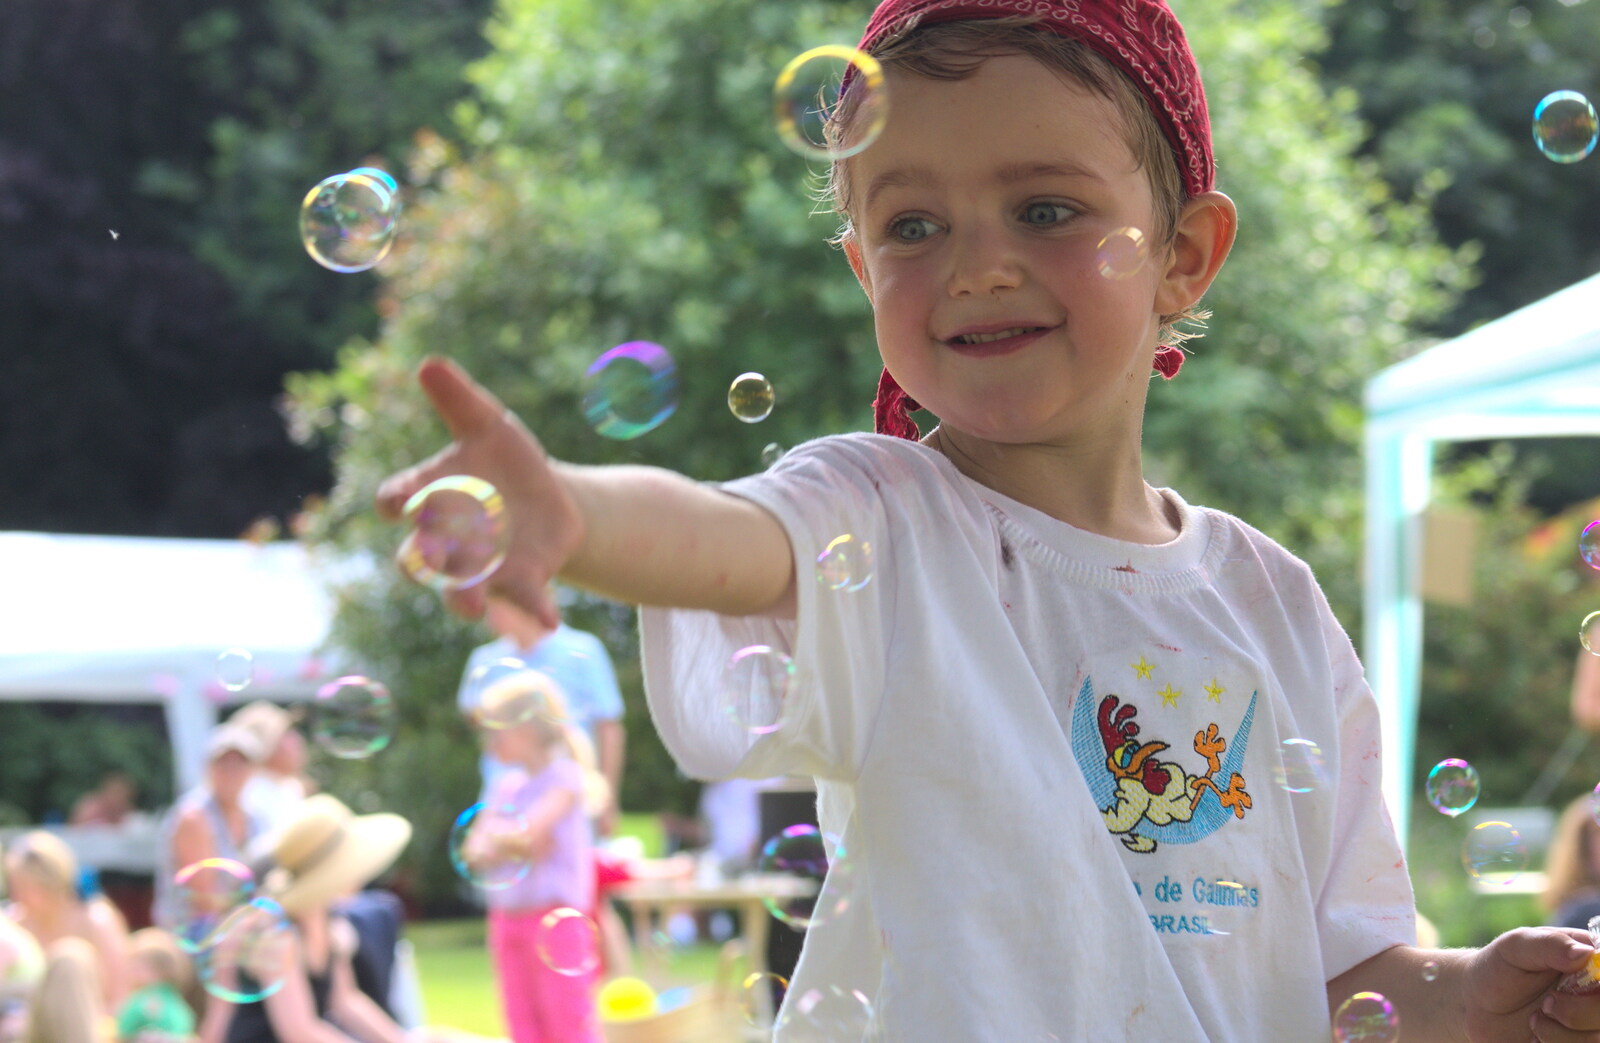 Fred chases bubbles from Marconi's Demolition and Brome Village Fete, Chelmsford and Brome, Suffolk - 6th July 2013